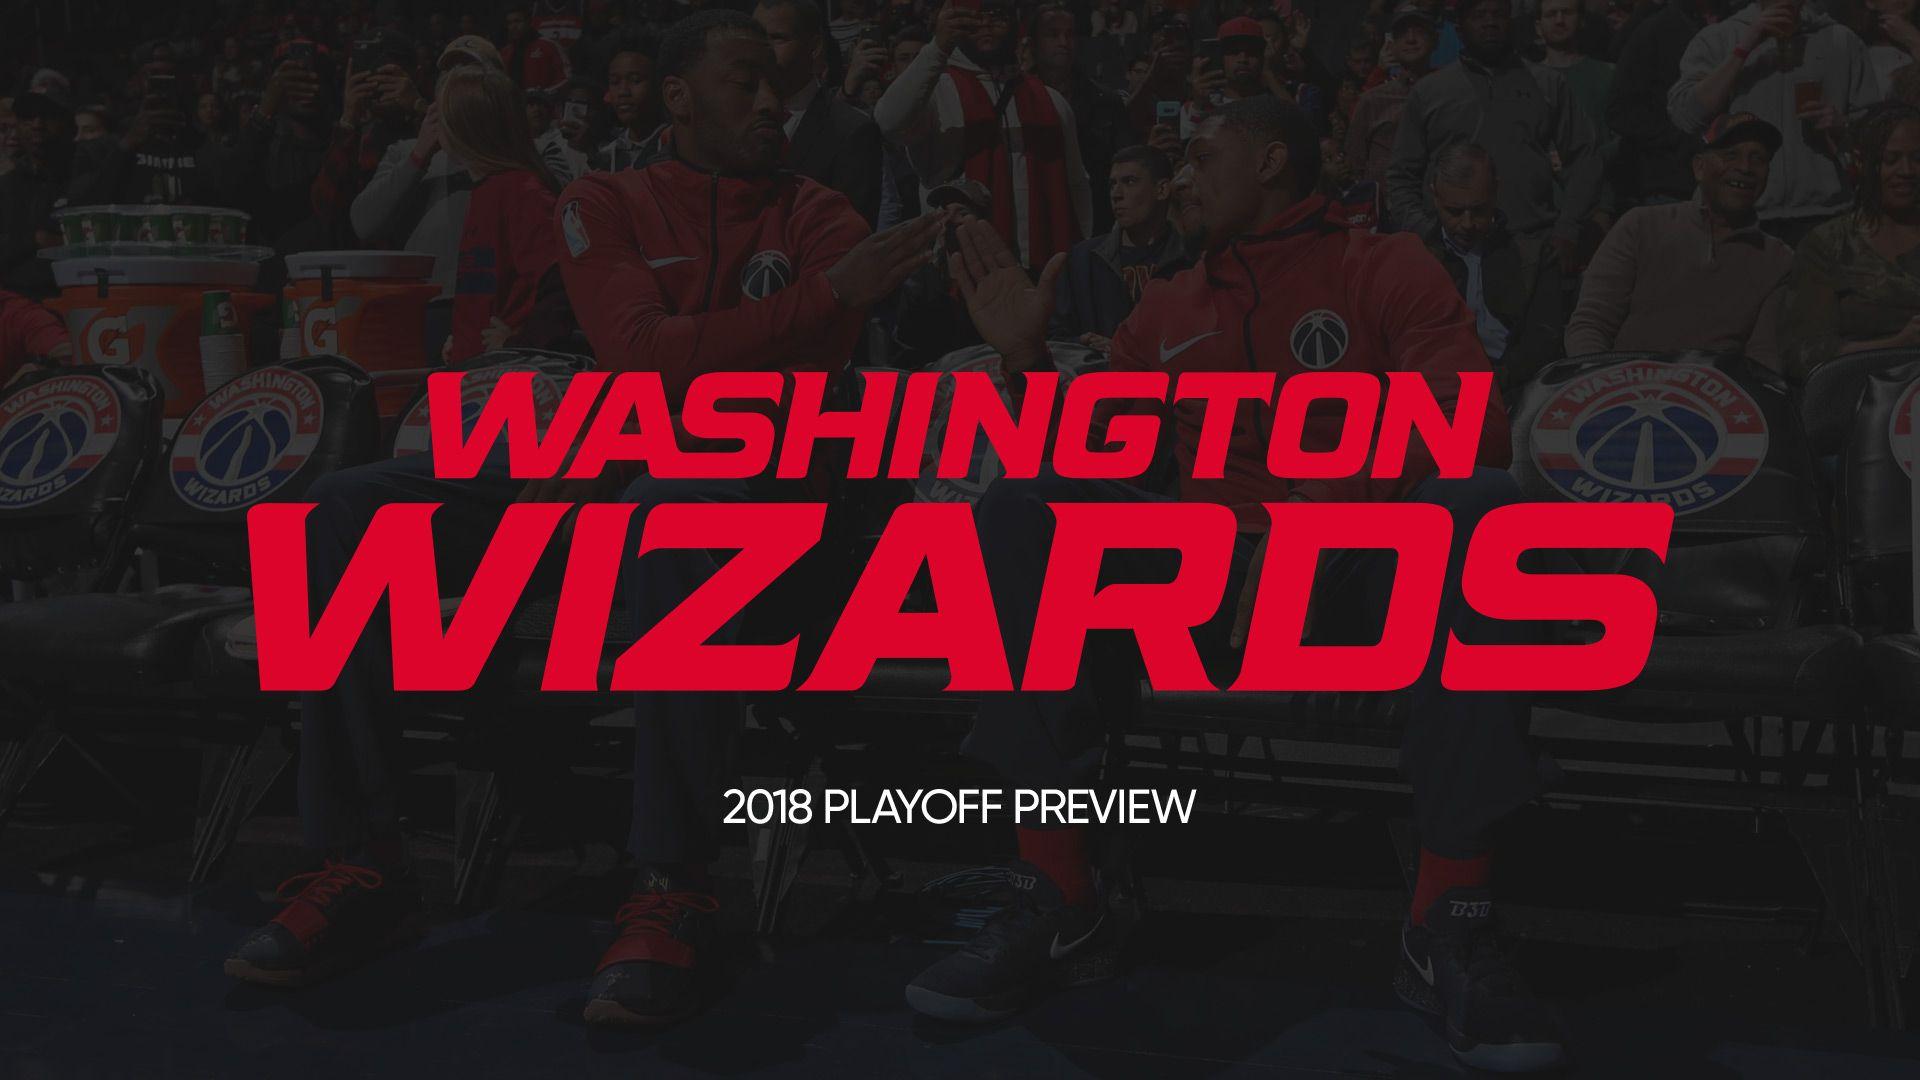 Washington Wizards 2018 Playoff Preview